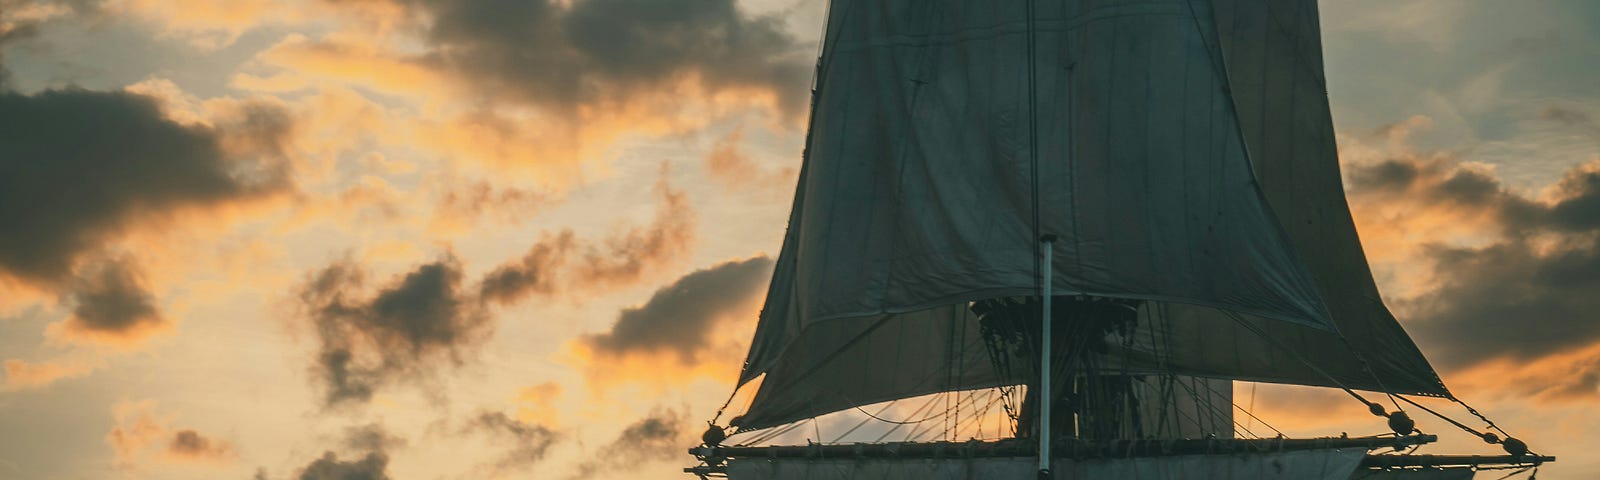 Photo: old-fashioned sailing ship on calm waters, before an orange sunset